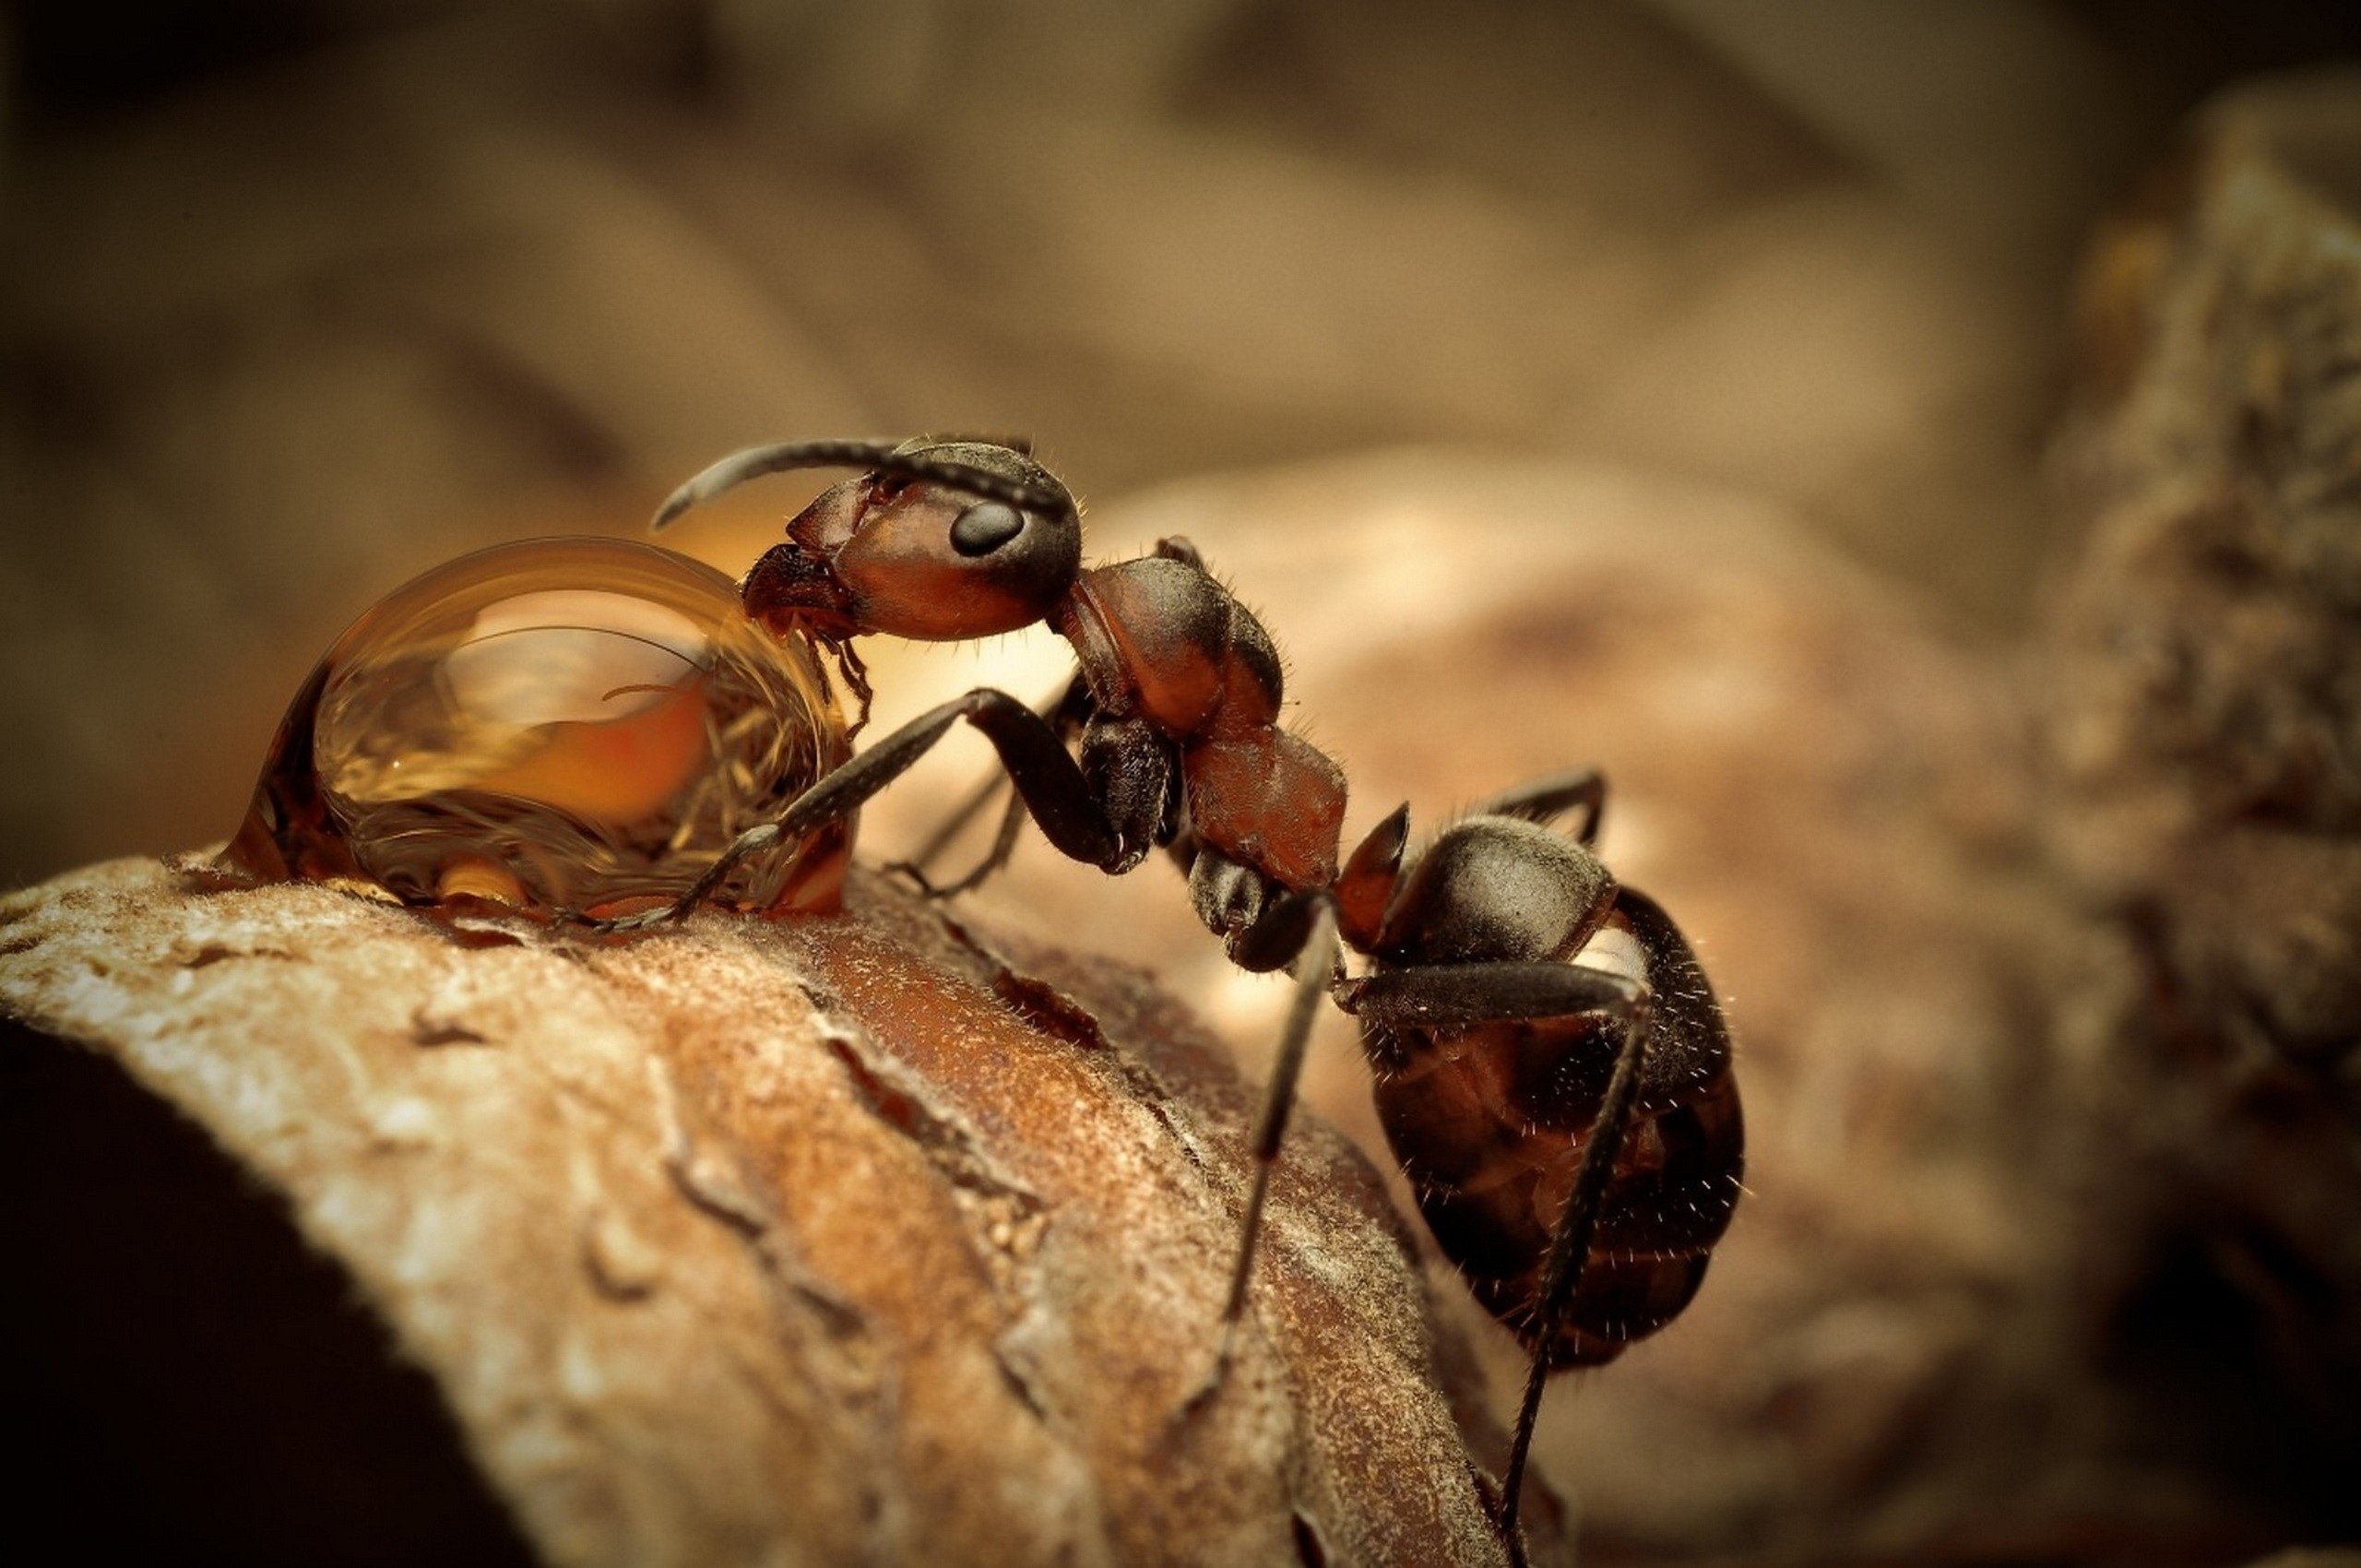 nature, Water drops, Macro, Depth of field, Insect, Ants, Wood Wallpaper